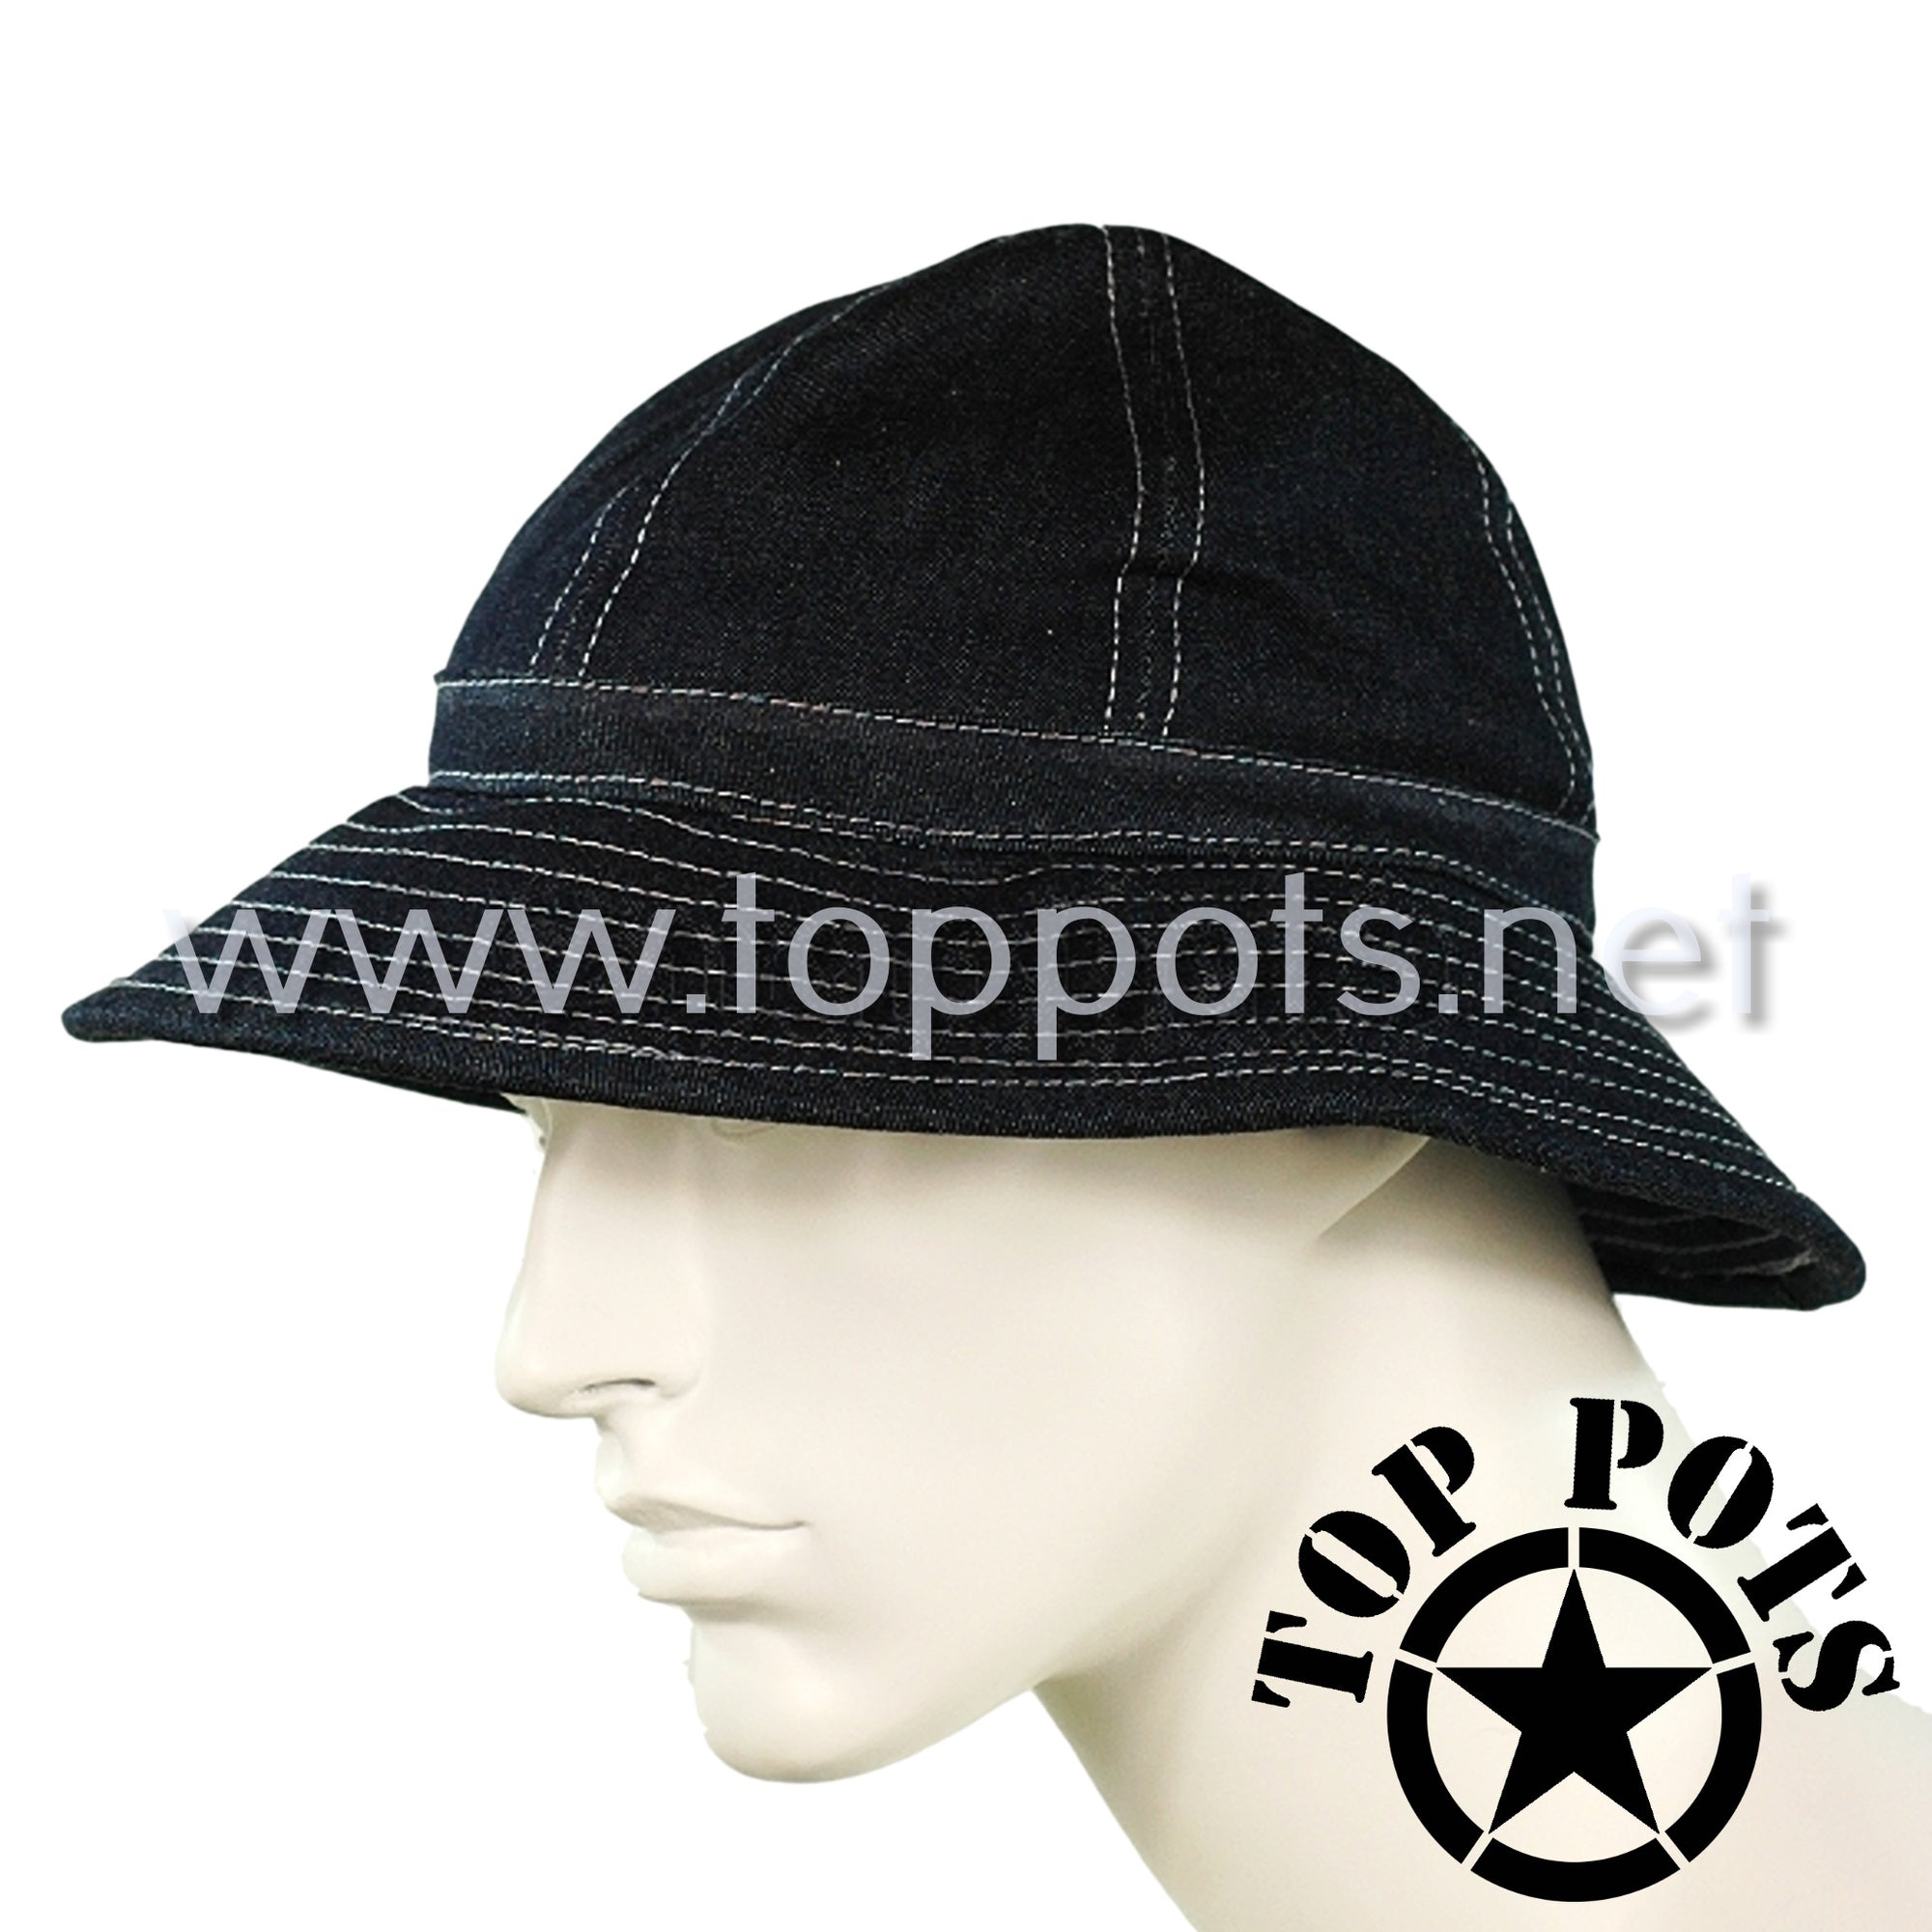 Featured Uniform - Reproduction WWII US Army Enlisted Uniform Daisy May Fatique Cap - Indigo Blue Denim (Hat Only)